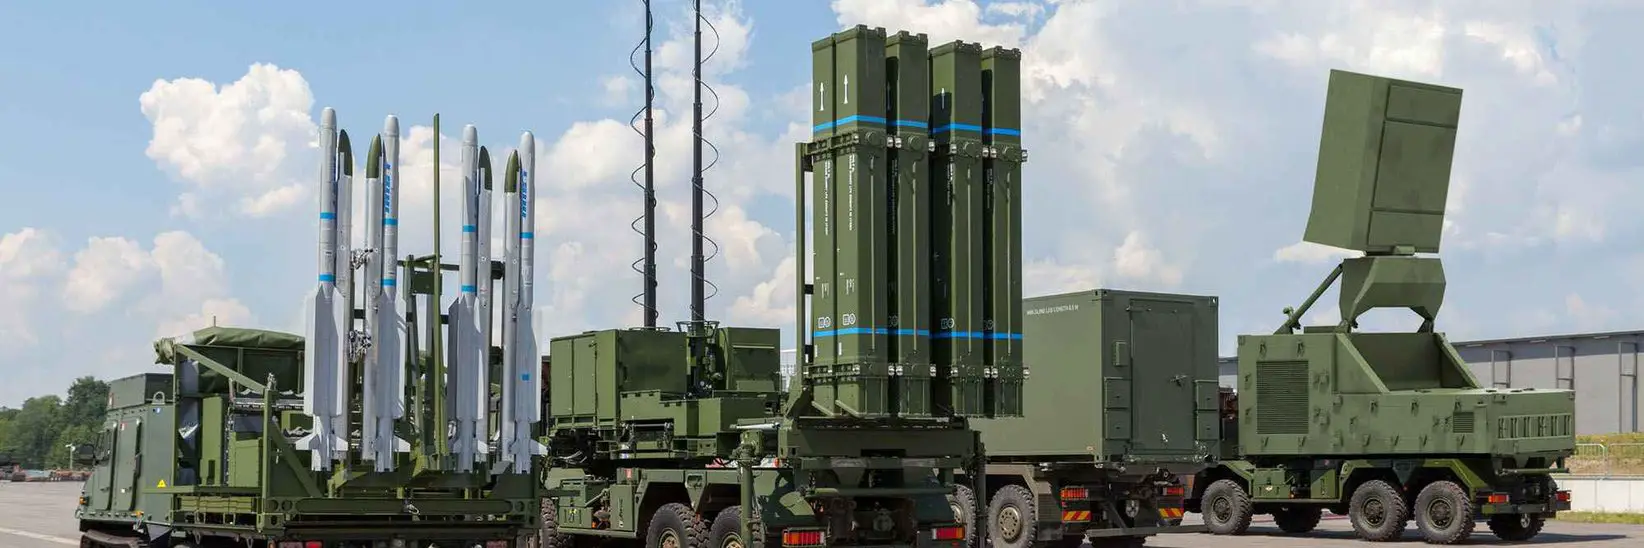 Diehl Defence Signs Contract for Norwegian Mobile Ground Based Air Defence